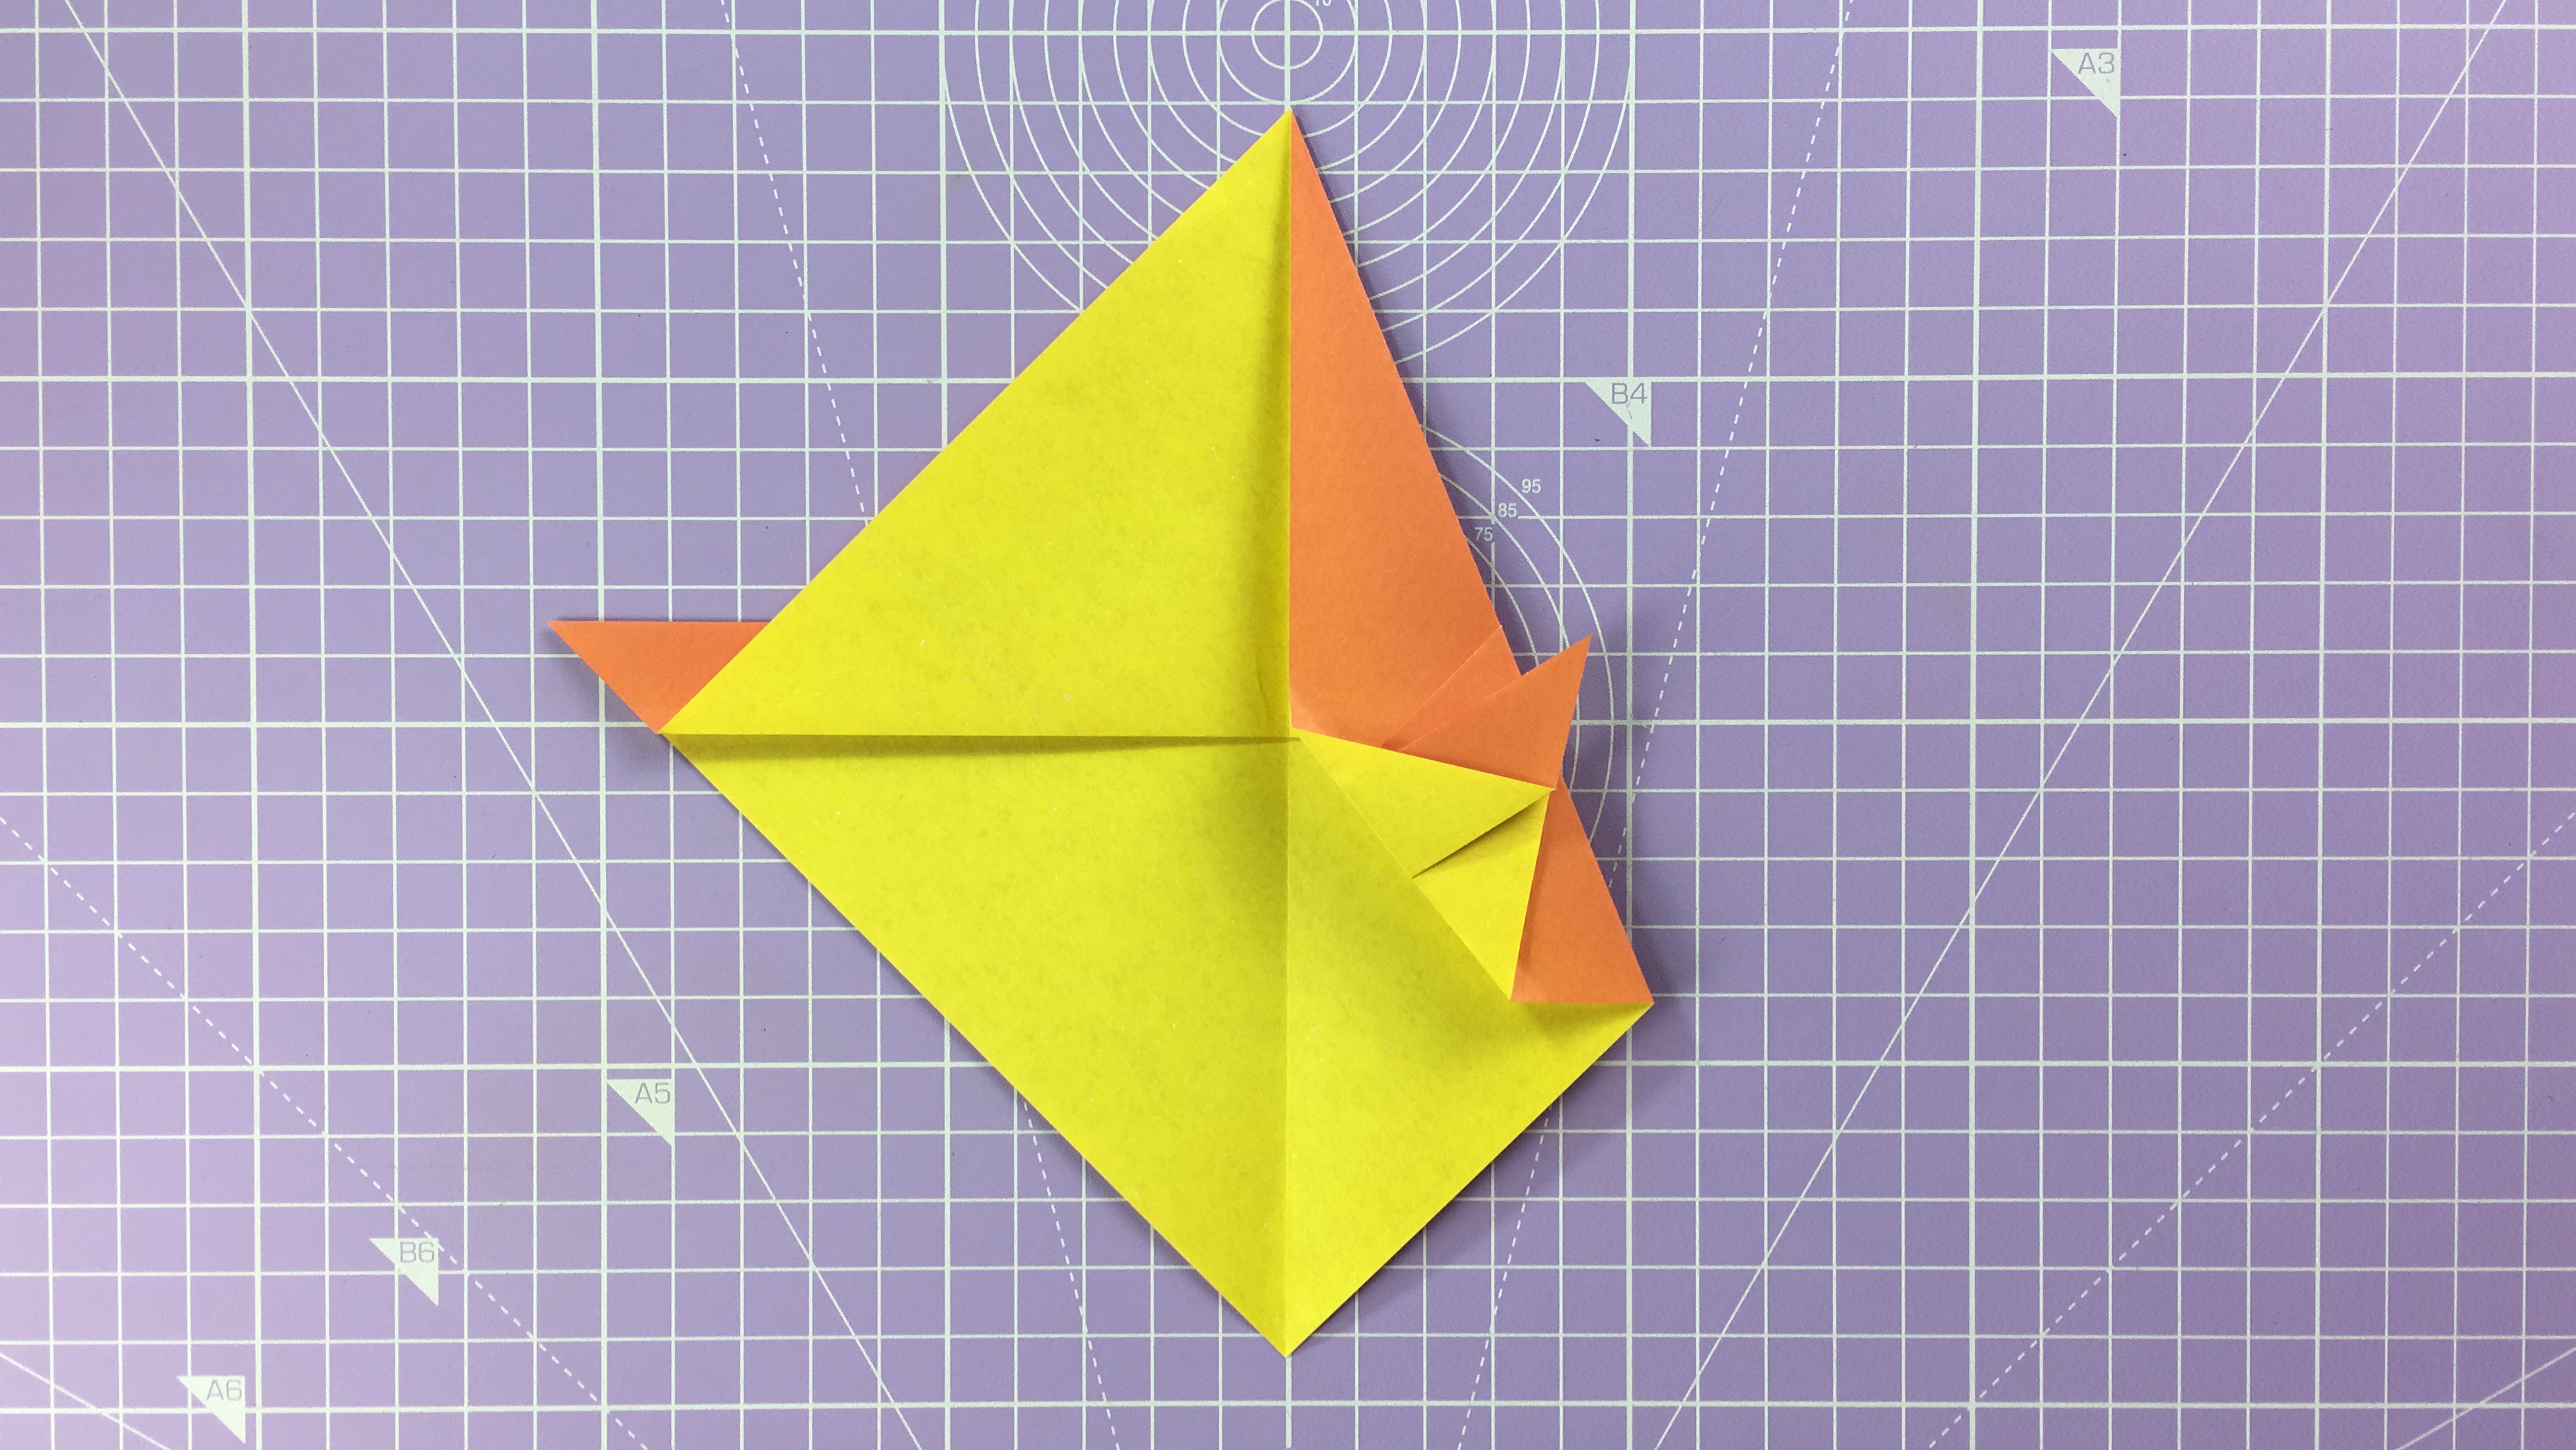 How to Make Paper Duck Step by Step